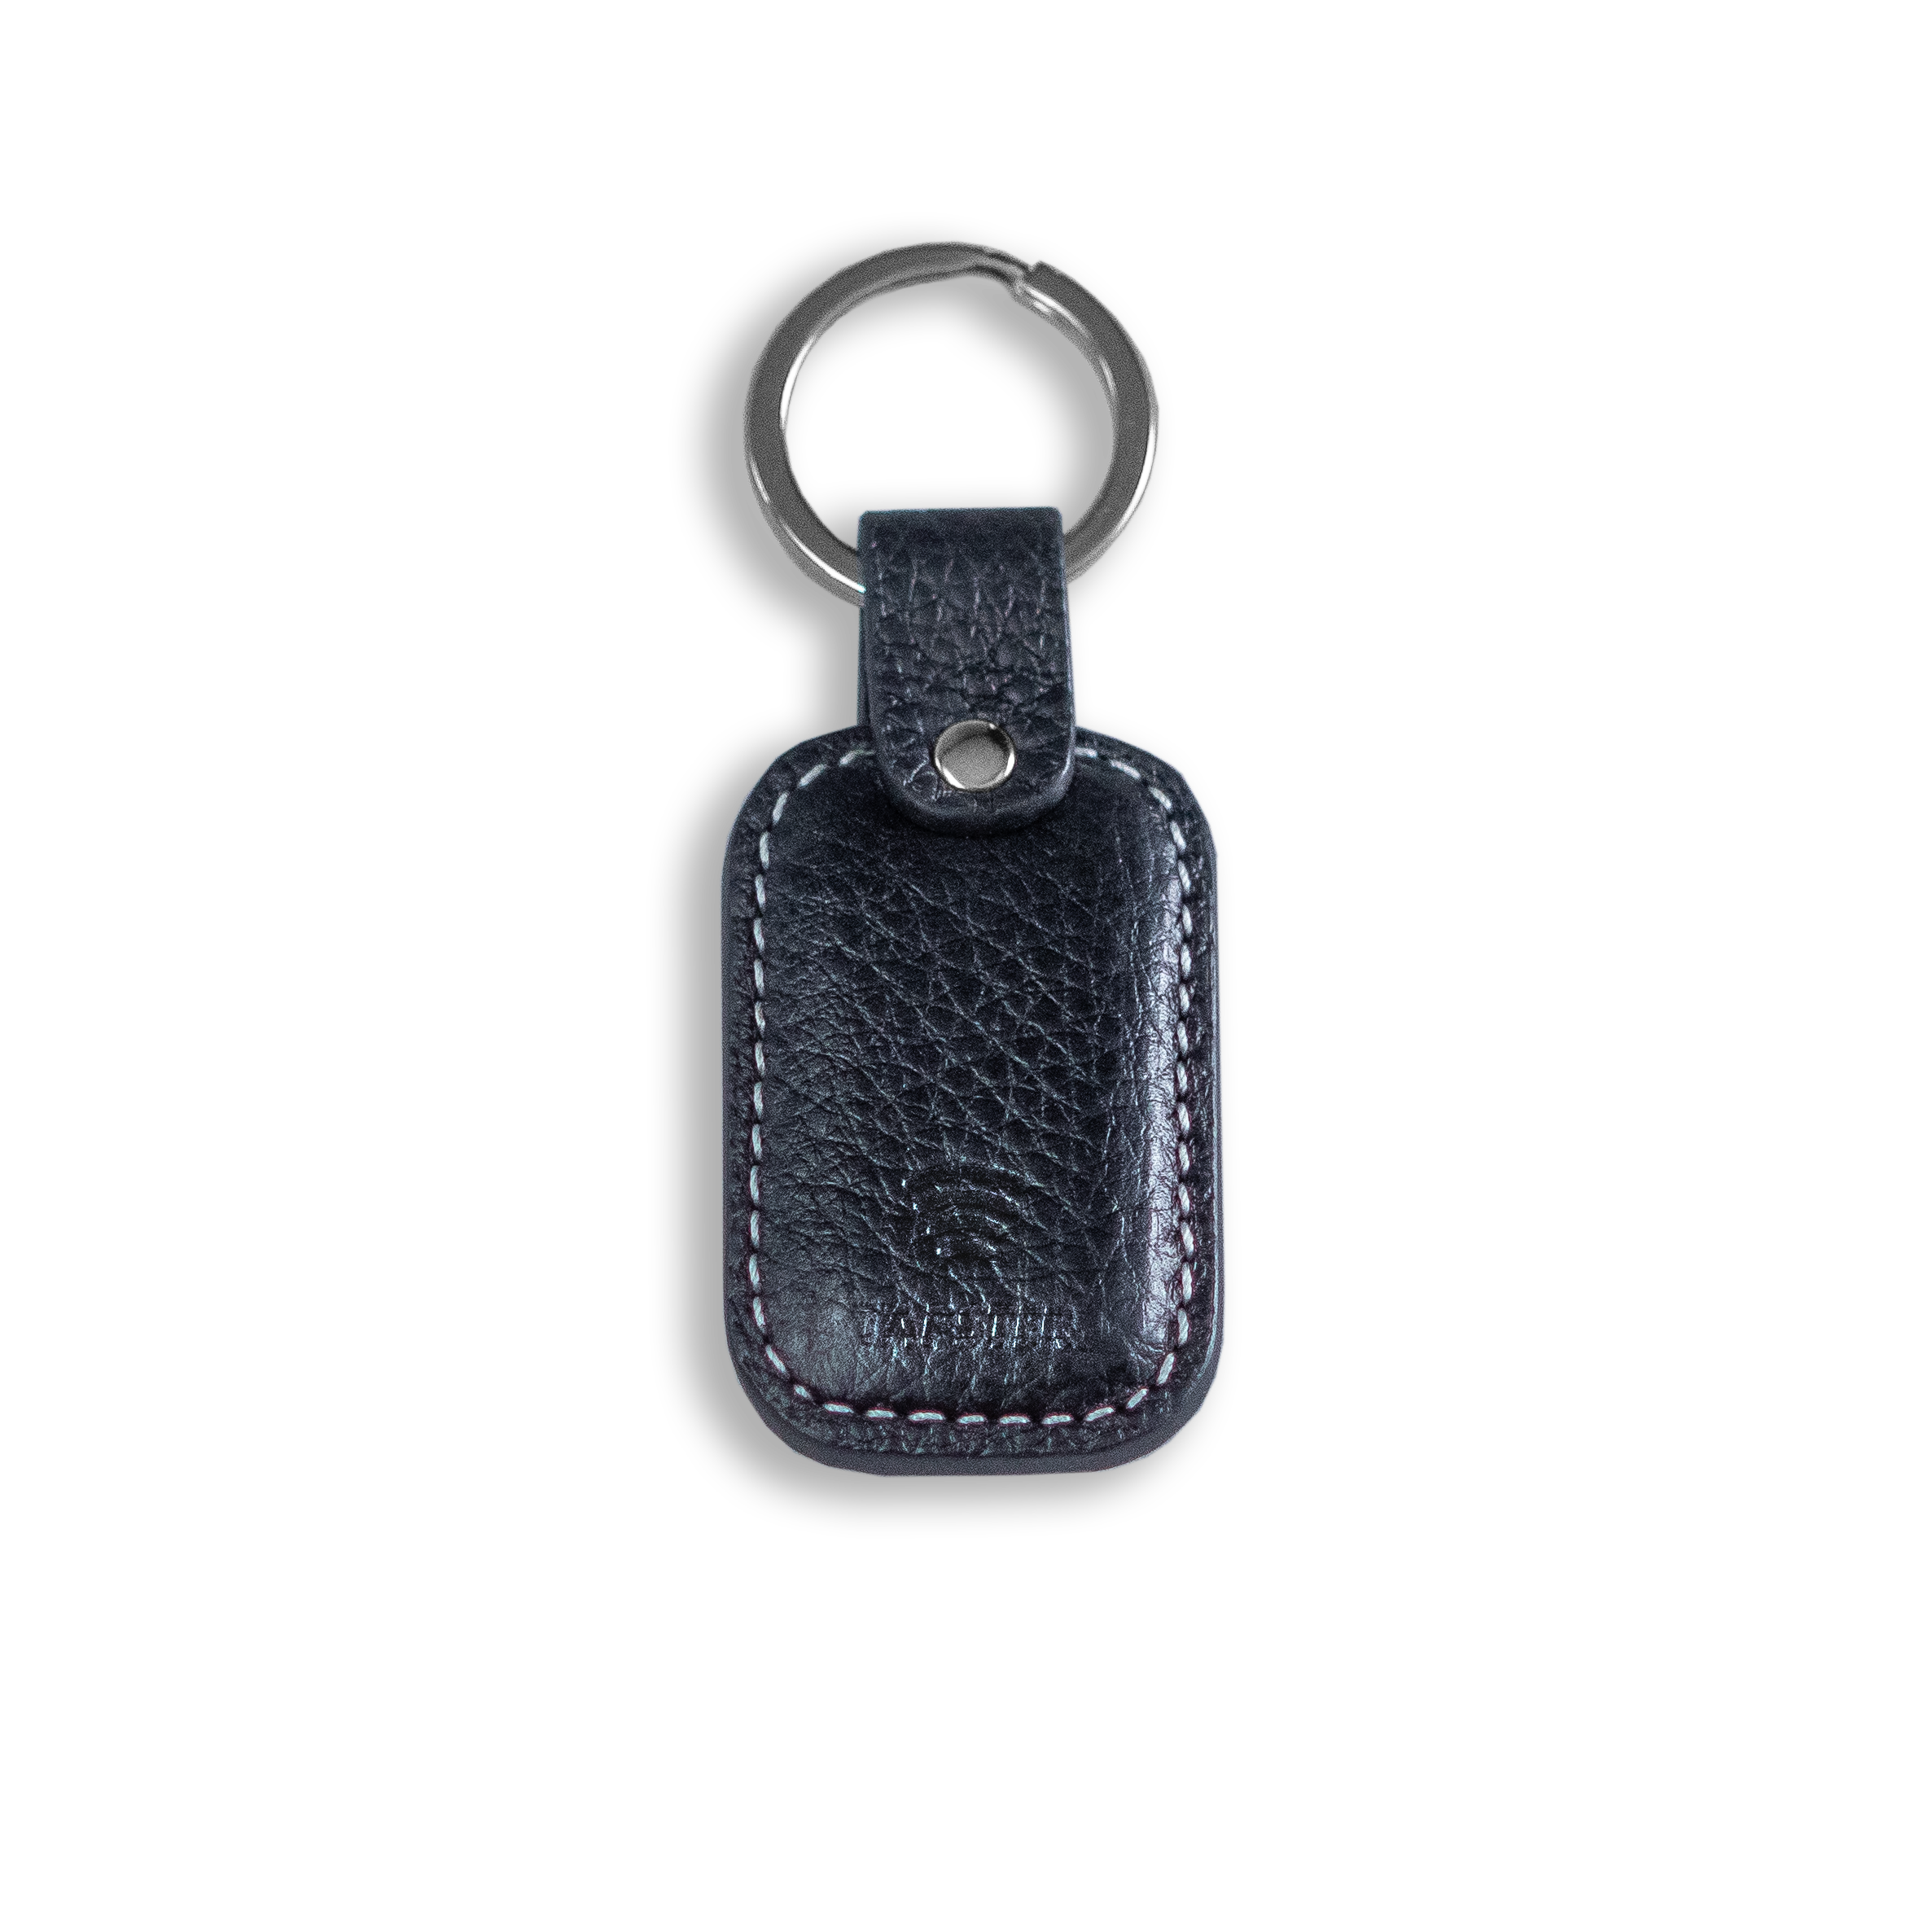 <img src="tapster.png" alt="Black-contactless keyring leather">